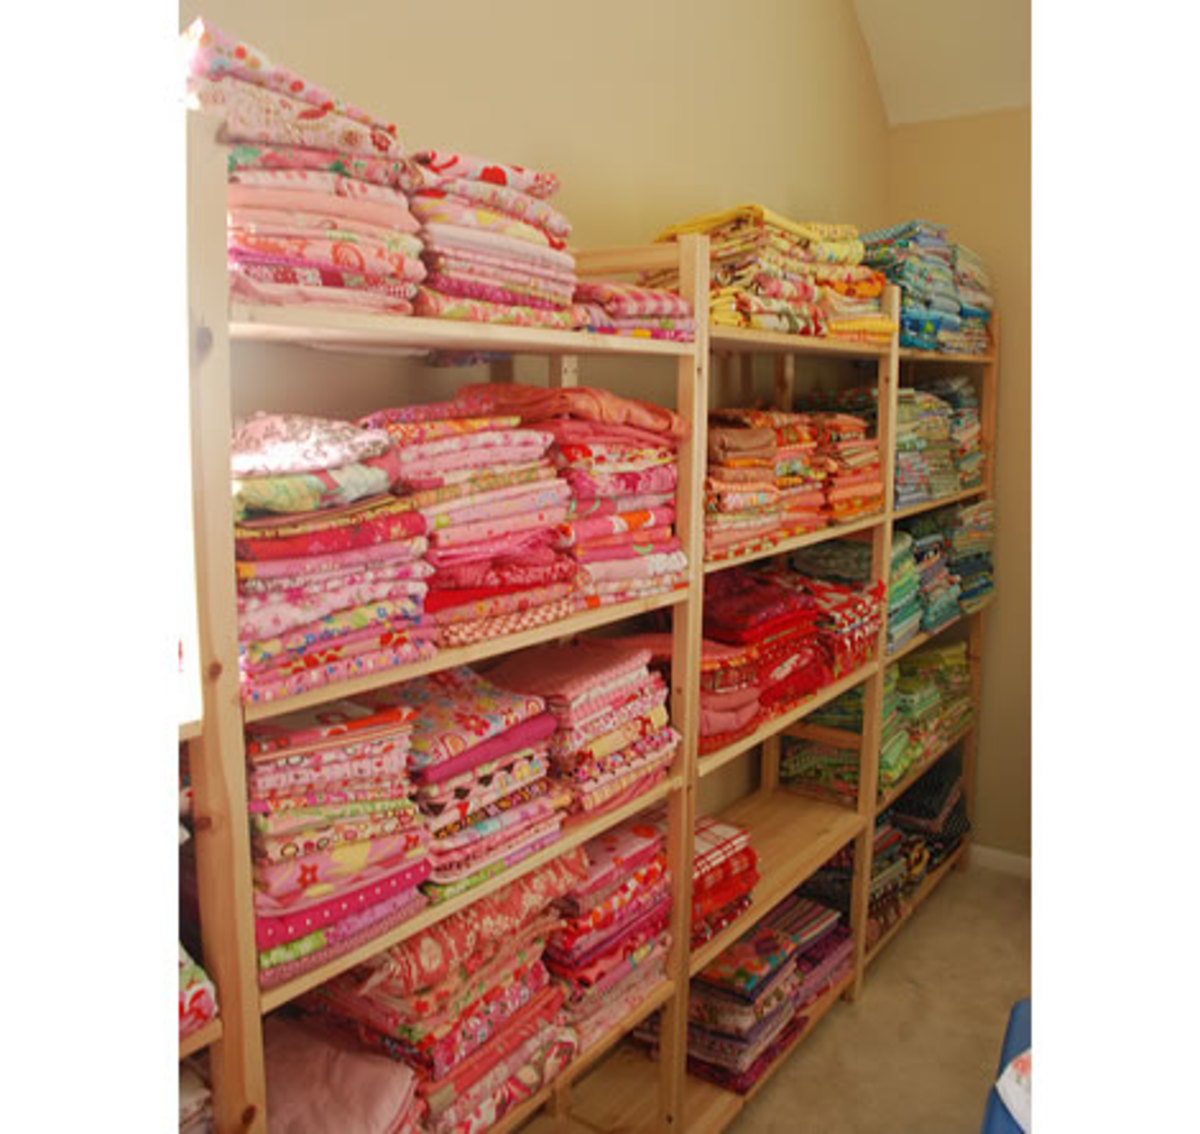 Craft Room Studio Storage Organization: Tips and Ideas - HubPages